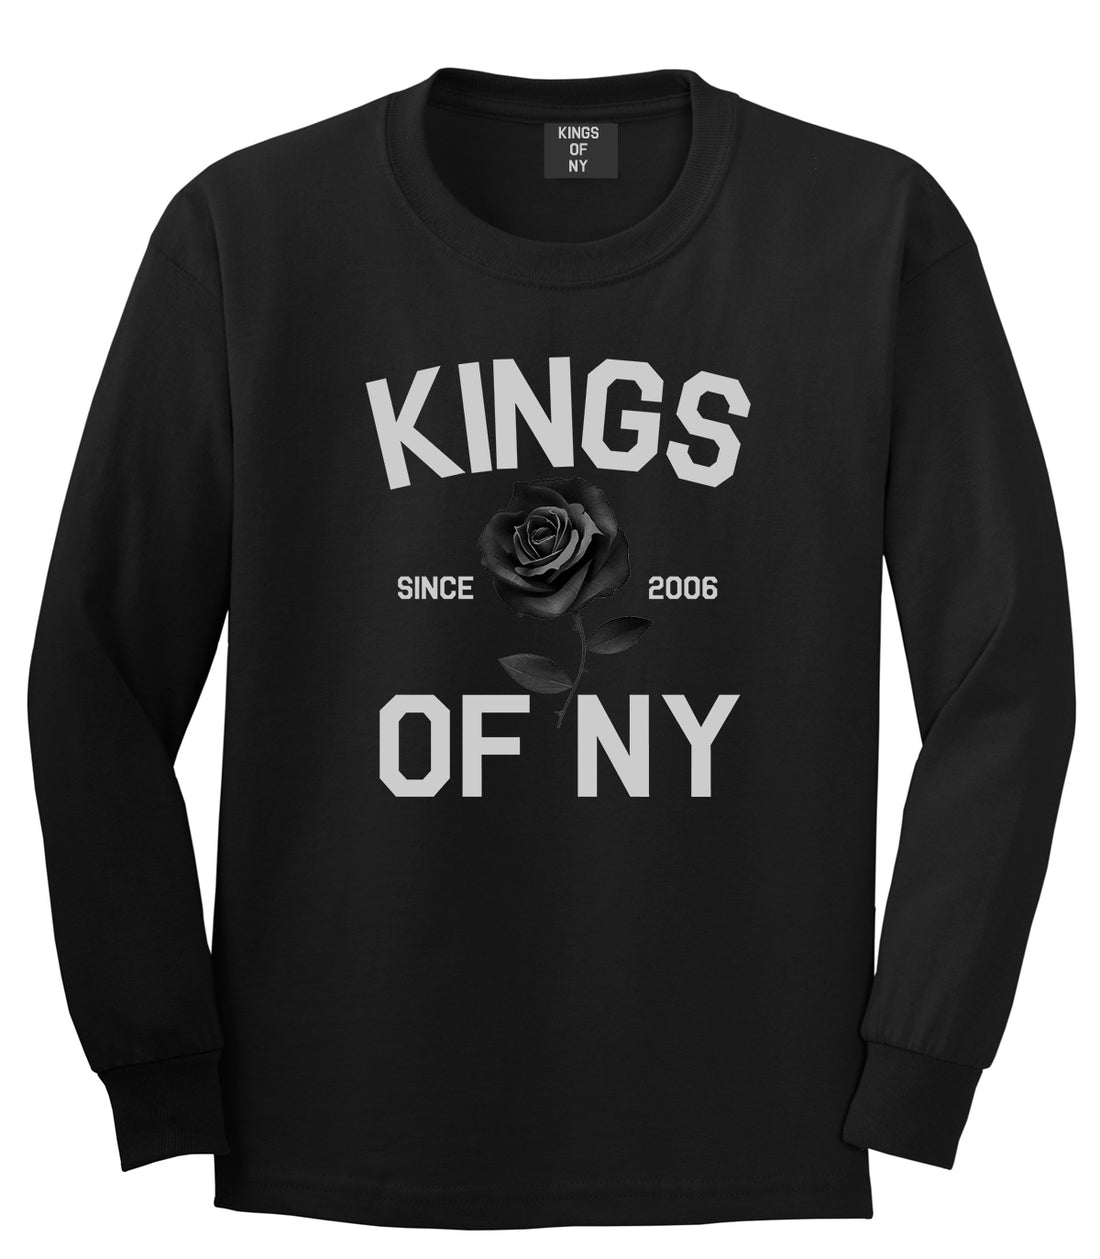 Black Rose Since 2006 Mens Long Sleeve T-Shirt Black by Kings Of NY